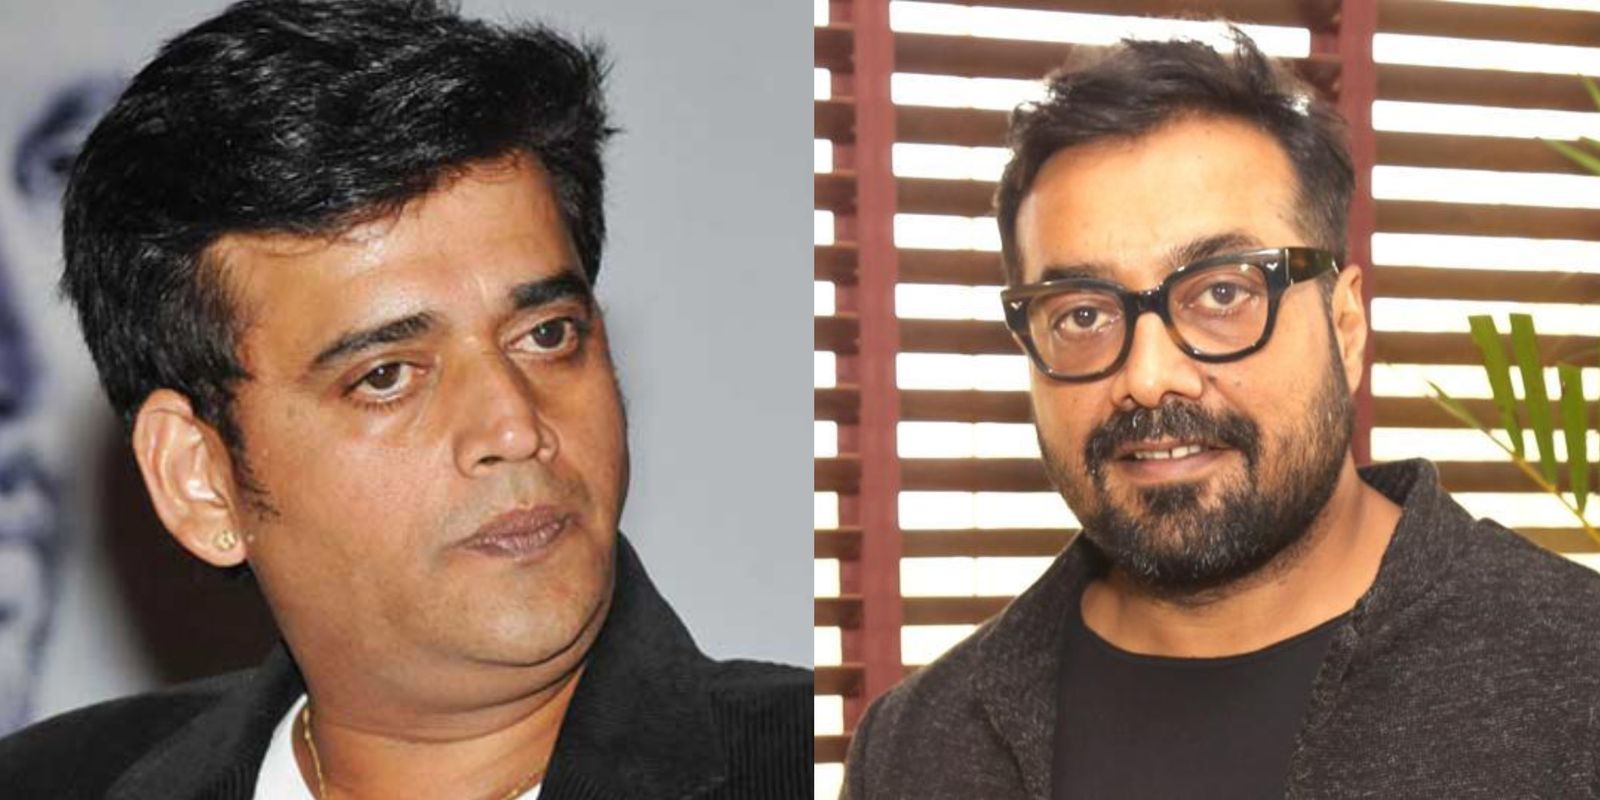 Ravi Kishan On Anurag Kashyap’s Drug Allegations: ‘One Must Think A Thousand Times Before Thinking, Speaking Anything’